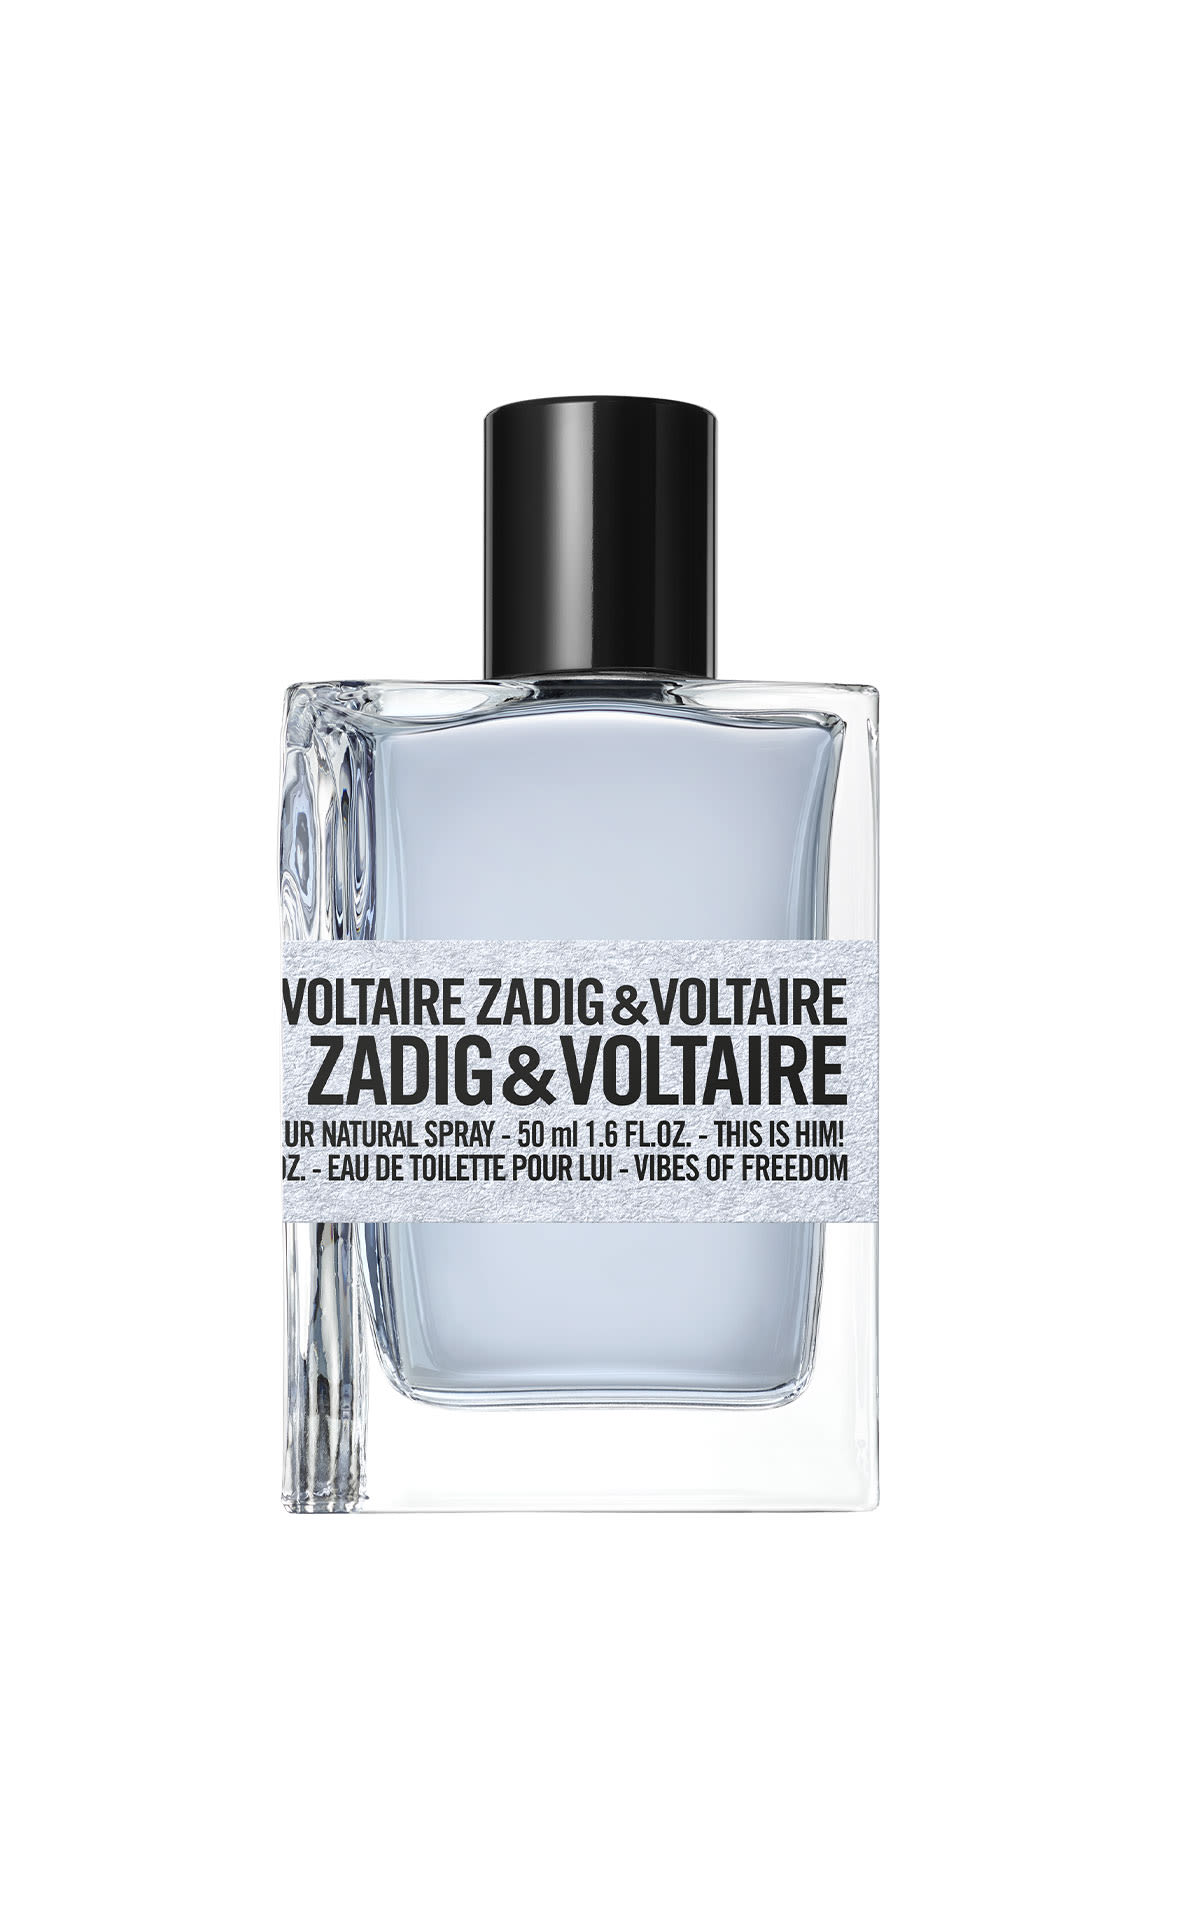 Beaute Prestige International Z&V This is vibes of freedom 2022 - This is him 50ml from Bicester Village